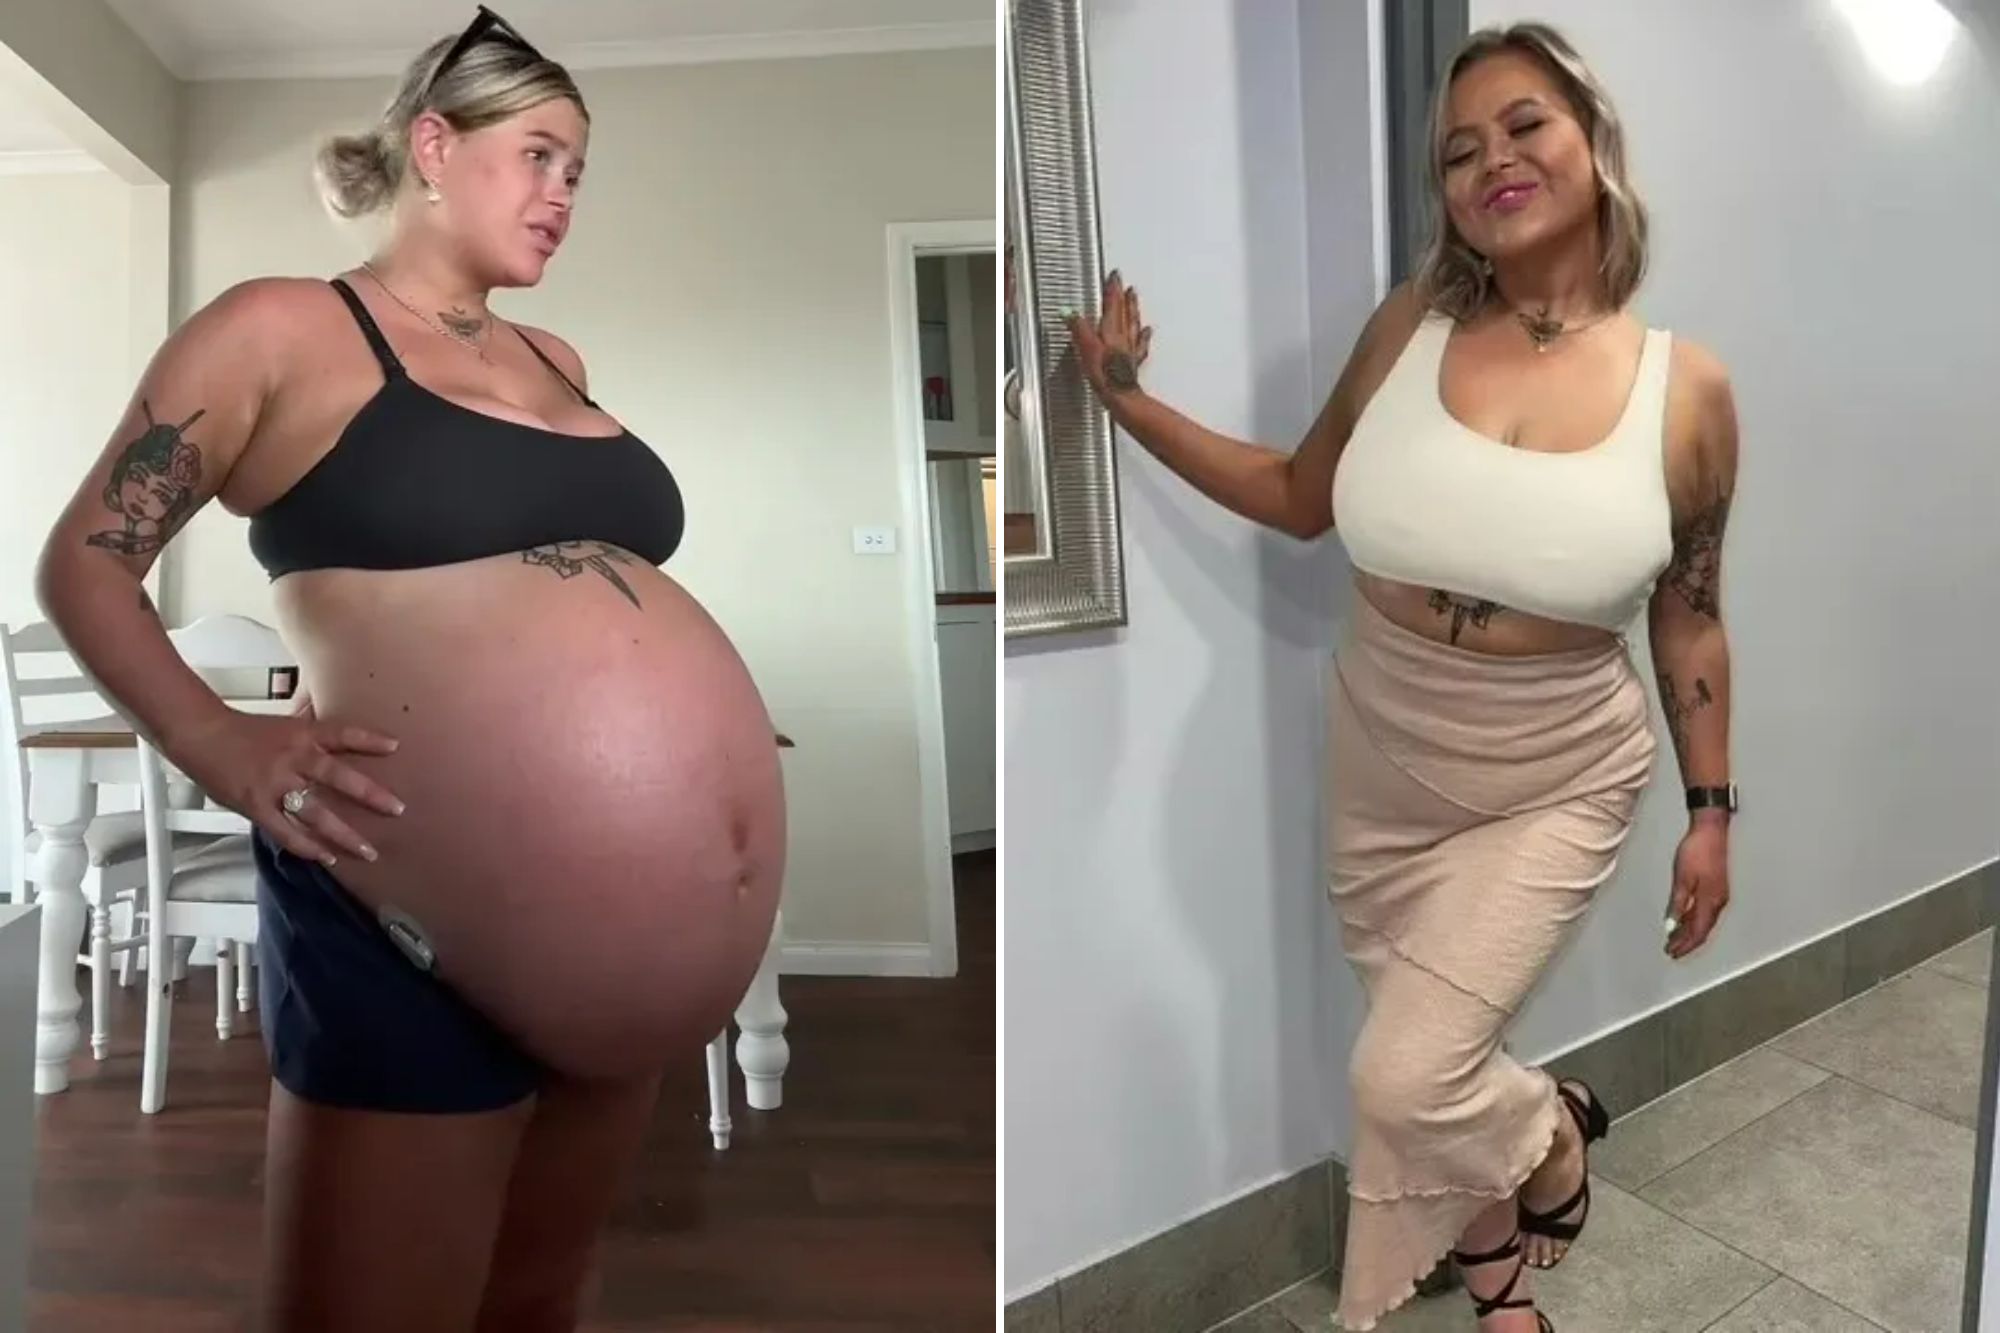 ‘Eight months? You mean years?’ people gasp as mum shows off giant baby bump